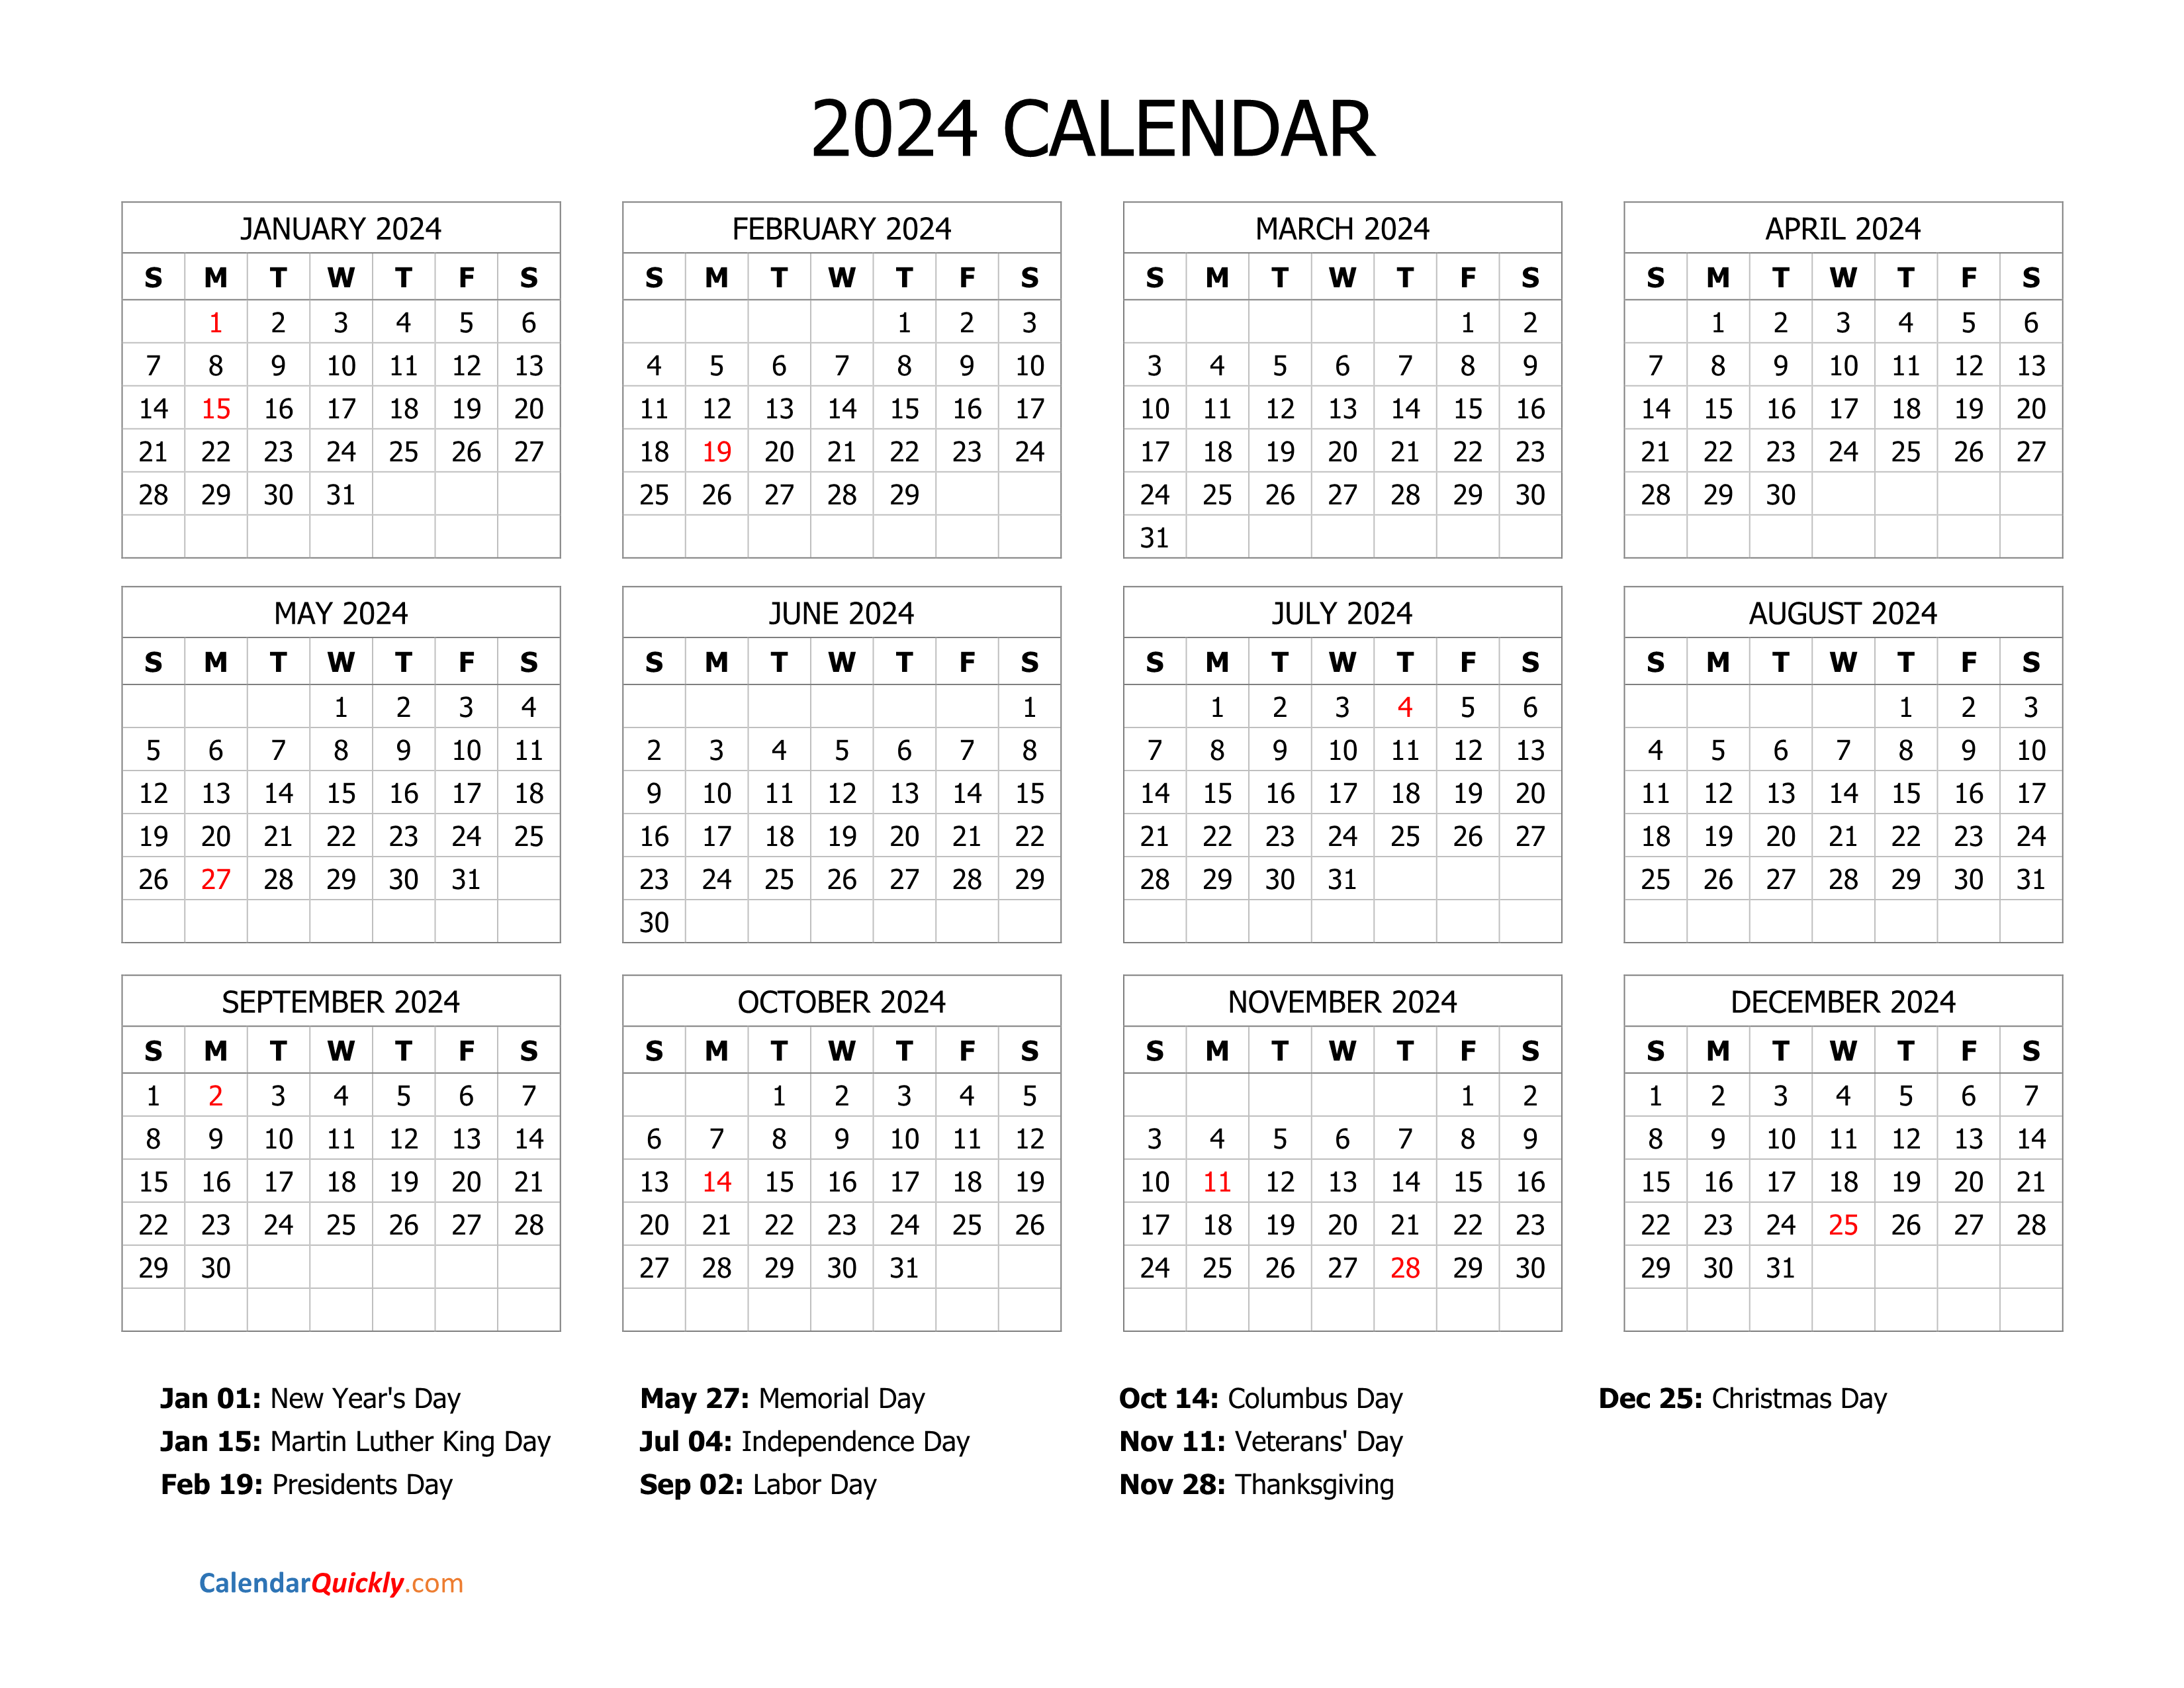 2024 Calendar Free Printable | Free Printable 2024 Calendar With Holidays And Pictures